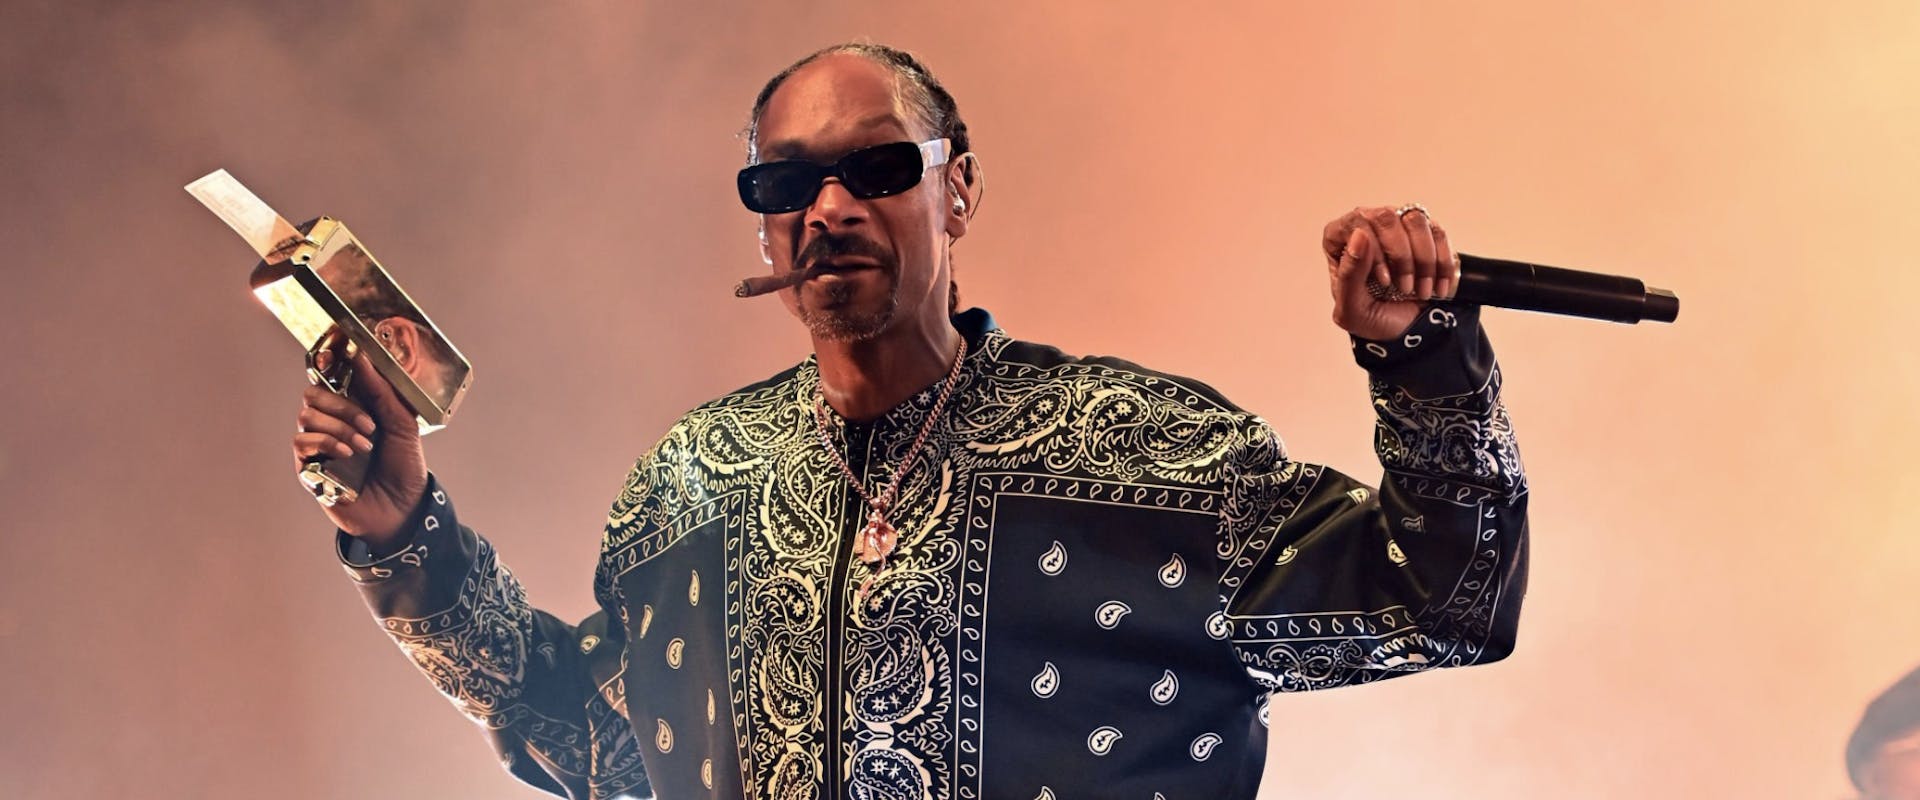 Snoop Dogg of hip-hop supergroup Mt. Westmore performs at Rupp Arena on November 20, 2021 in Lexington, Kentucky.